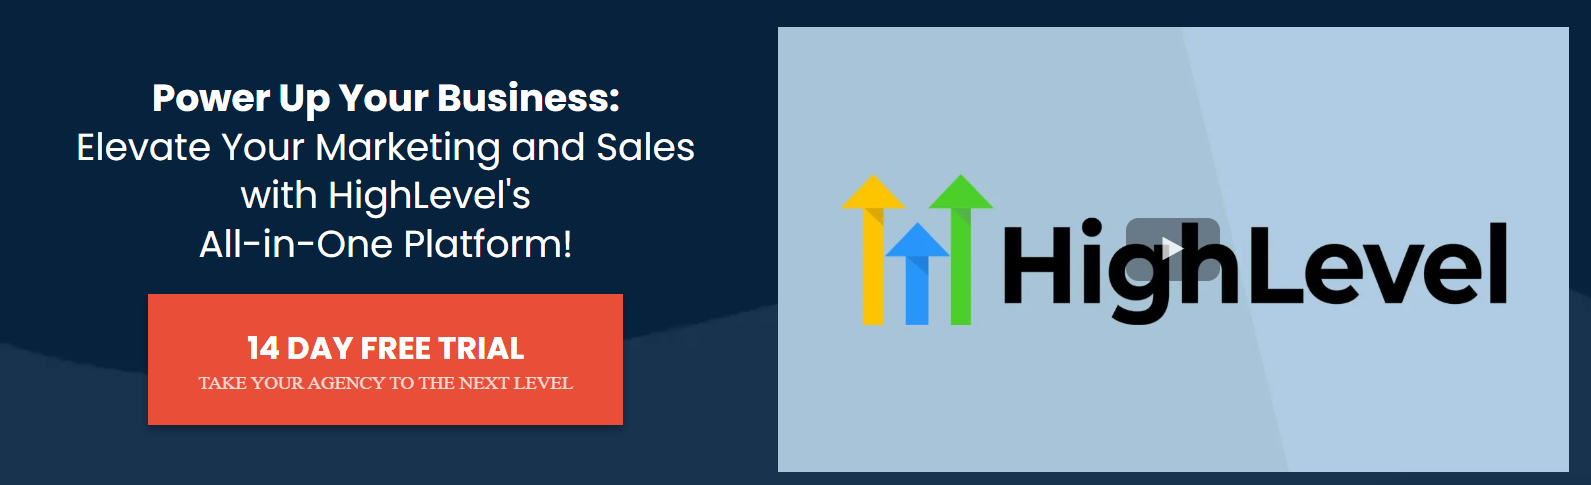 Revolutionize Your Agency: HighLevel’s All-in-One Platform for Marketing Mastery and Business Growth : Reviews